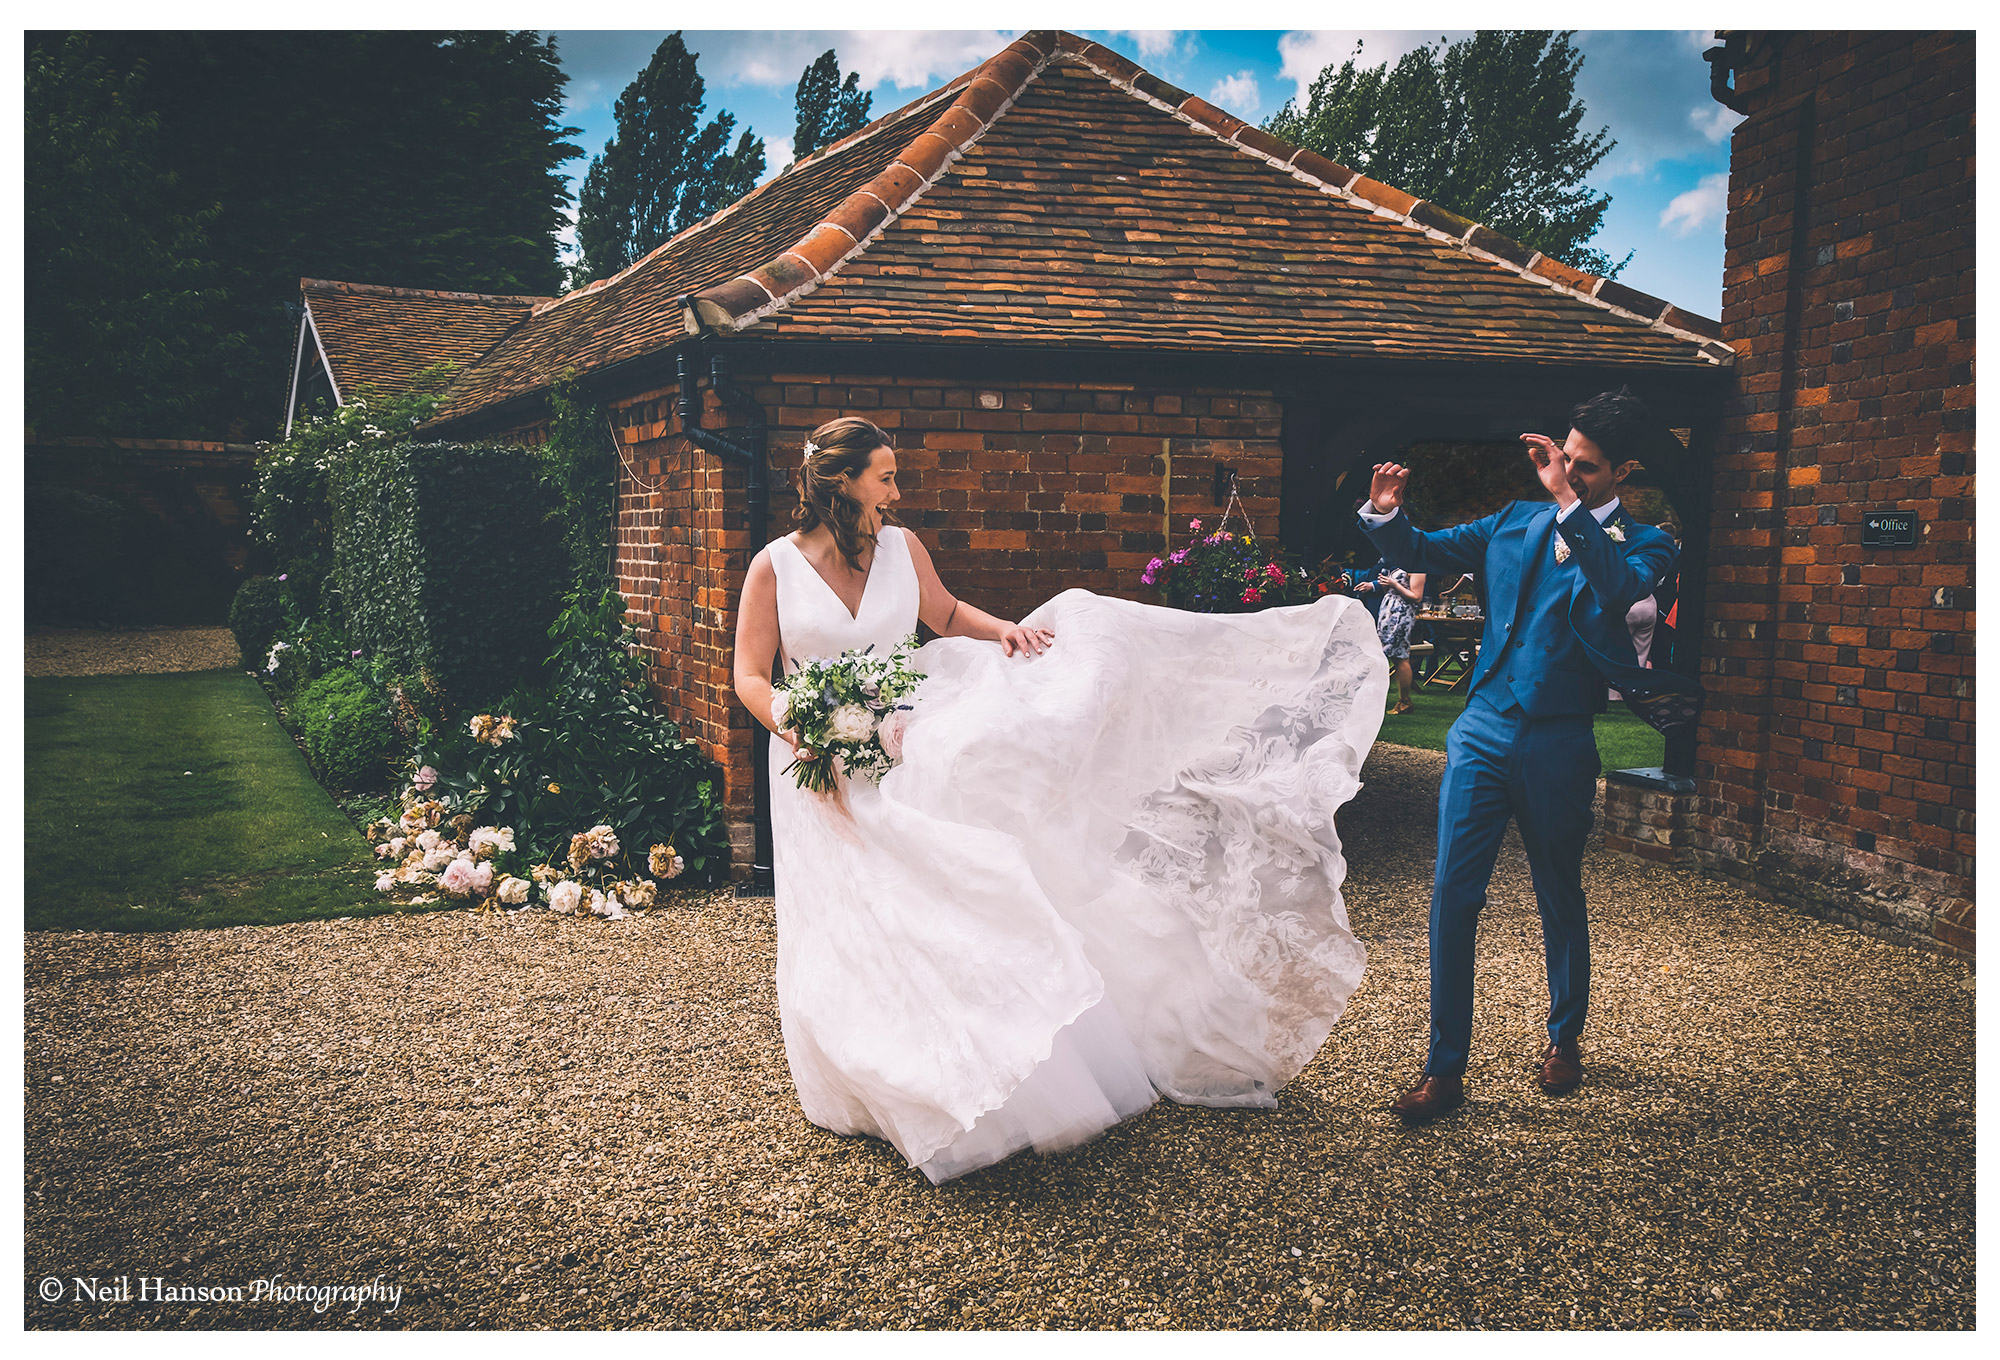 A windy day blows the Brides Wedding dress at Lillibrook Manor Wedding Venue